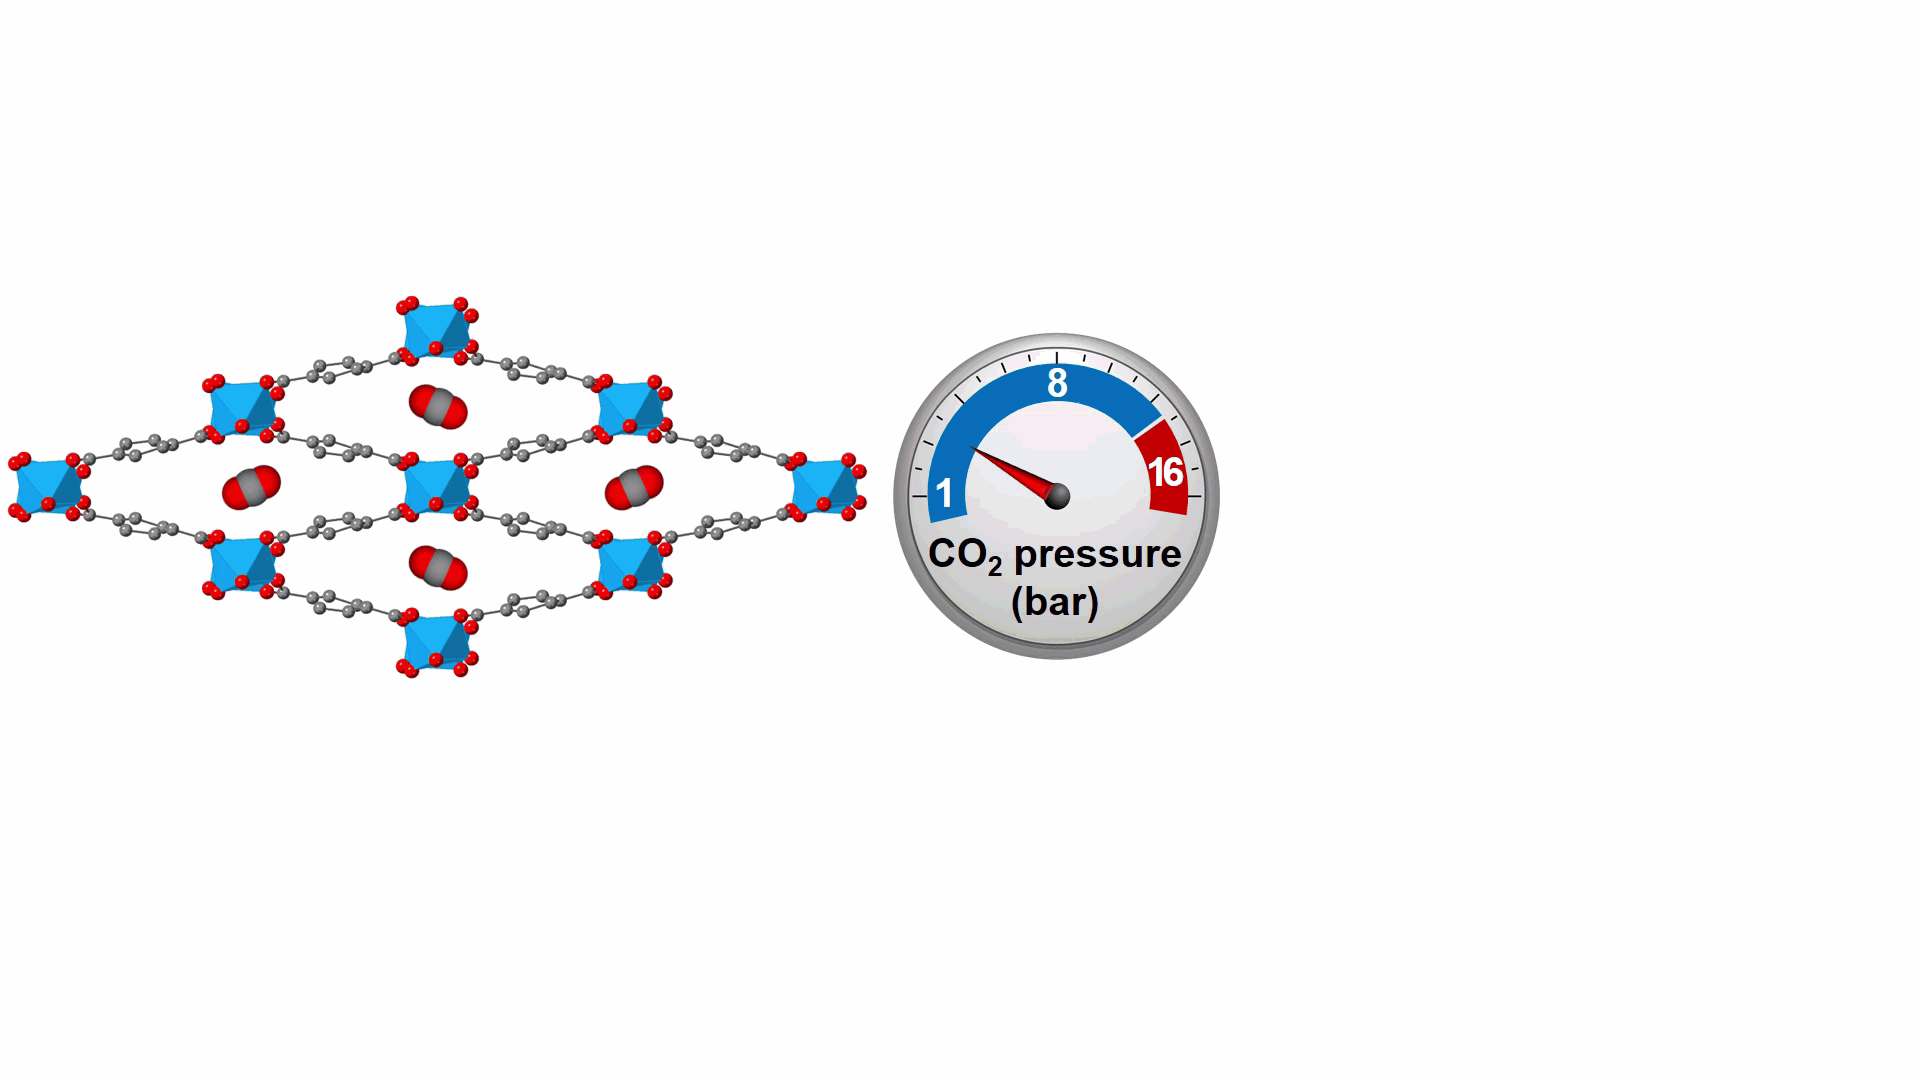 A moving gif showing a scheme of the cooling cycle that involves the material adsorbing and then releasing carbon dioxide